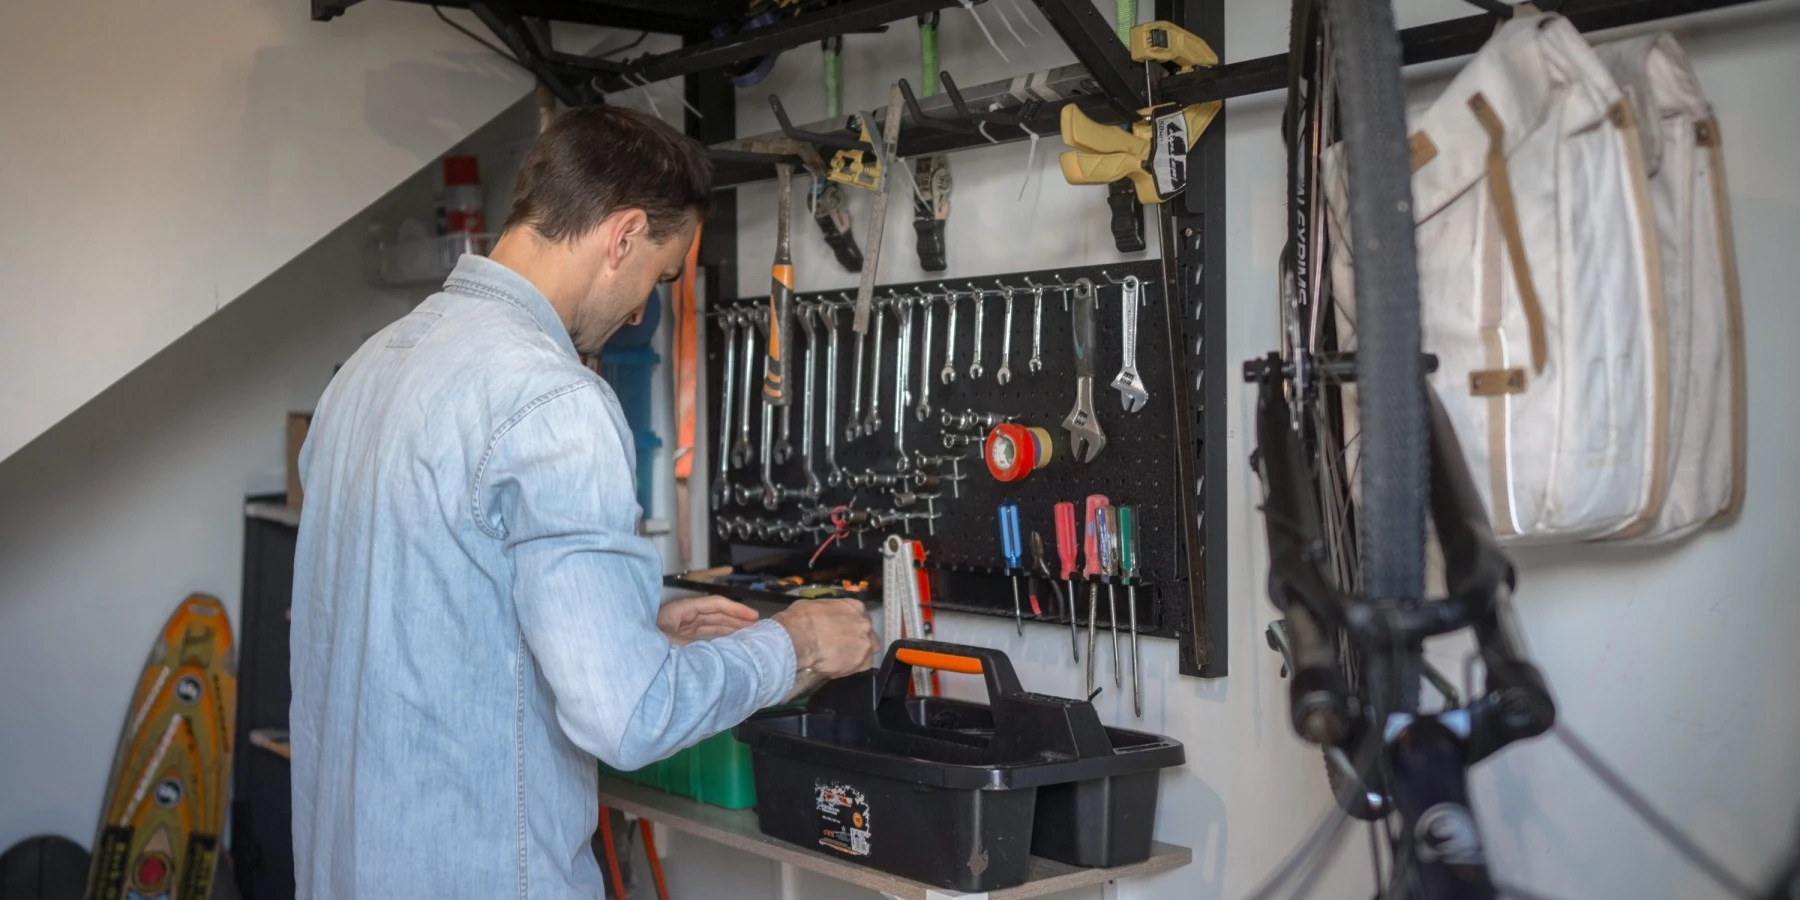 cleaning your garage - getting rid of old tools